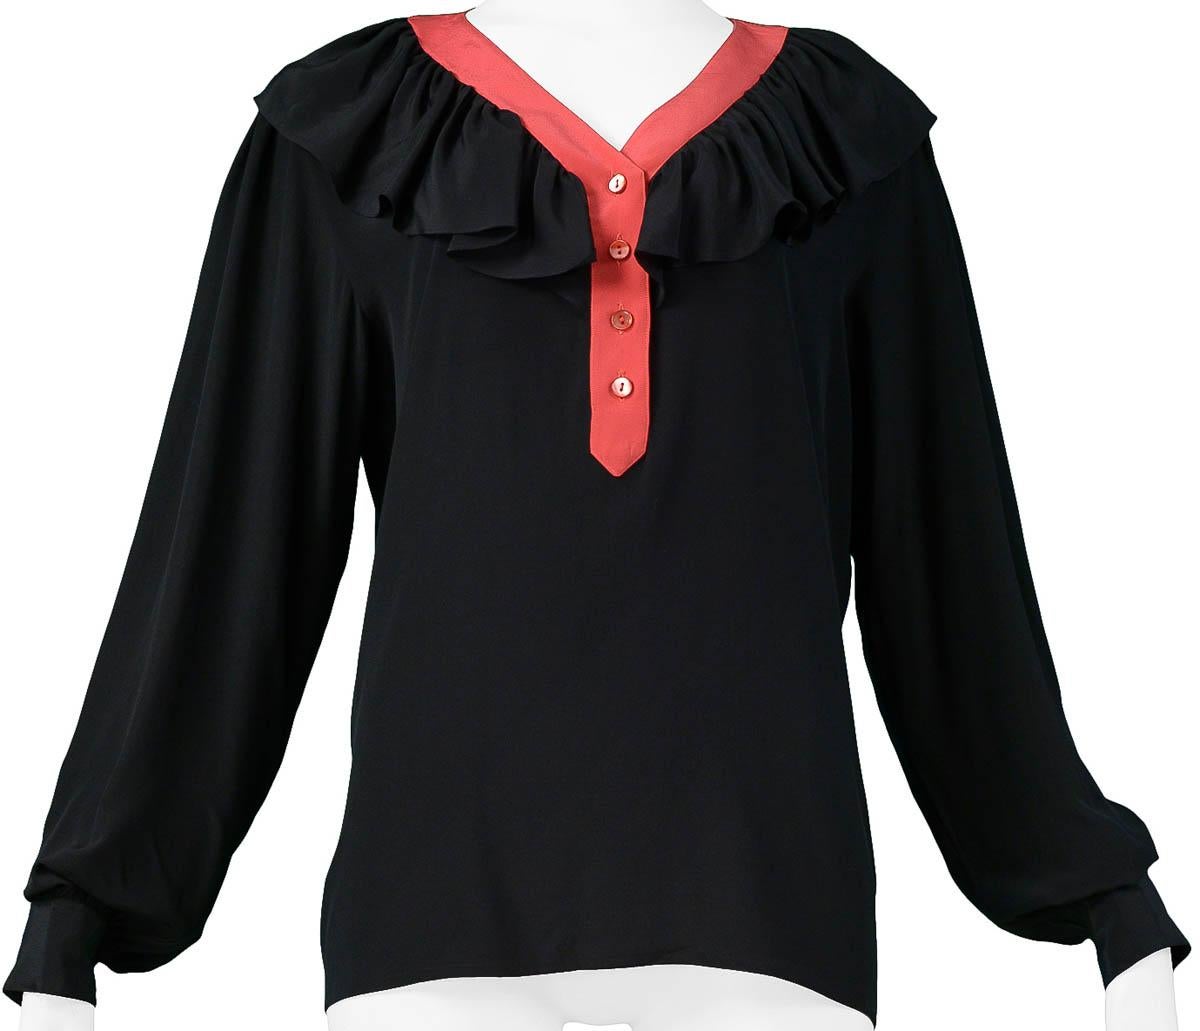 Vintage Yves Saint Laurent black silk blouse with red trim, button front, and ruffle collar.

Excellent Condition. 

Size: 42